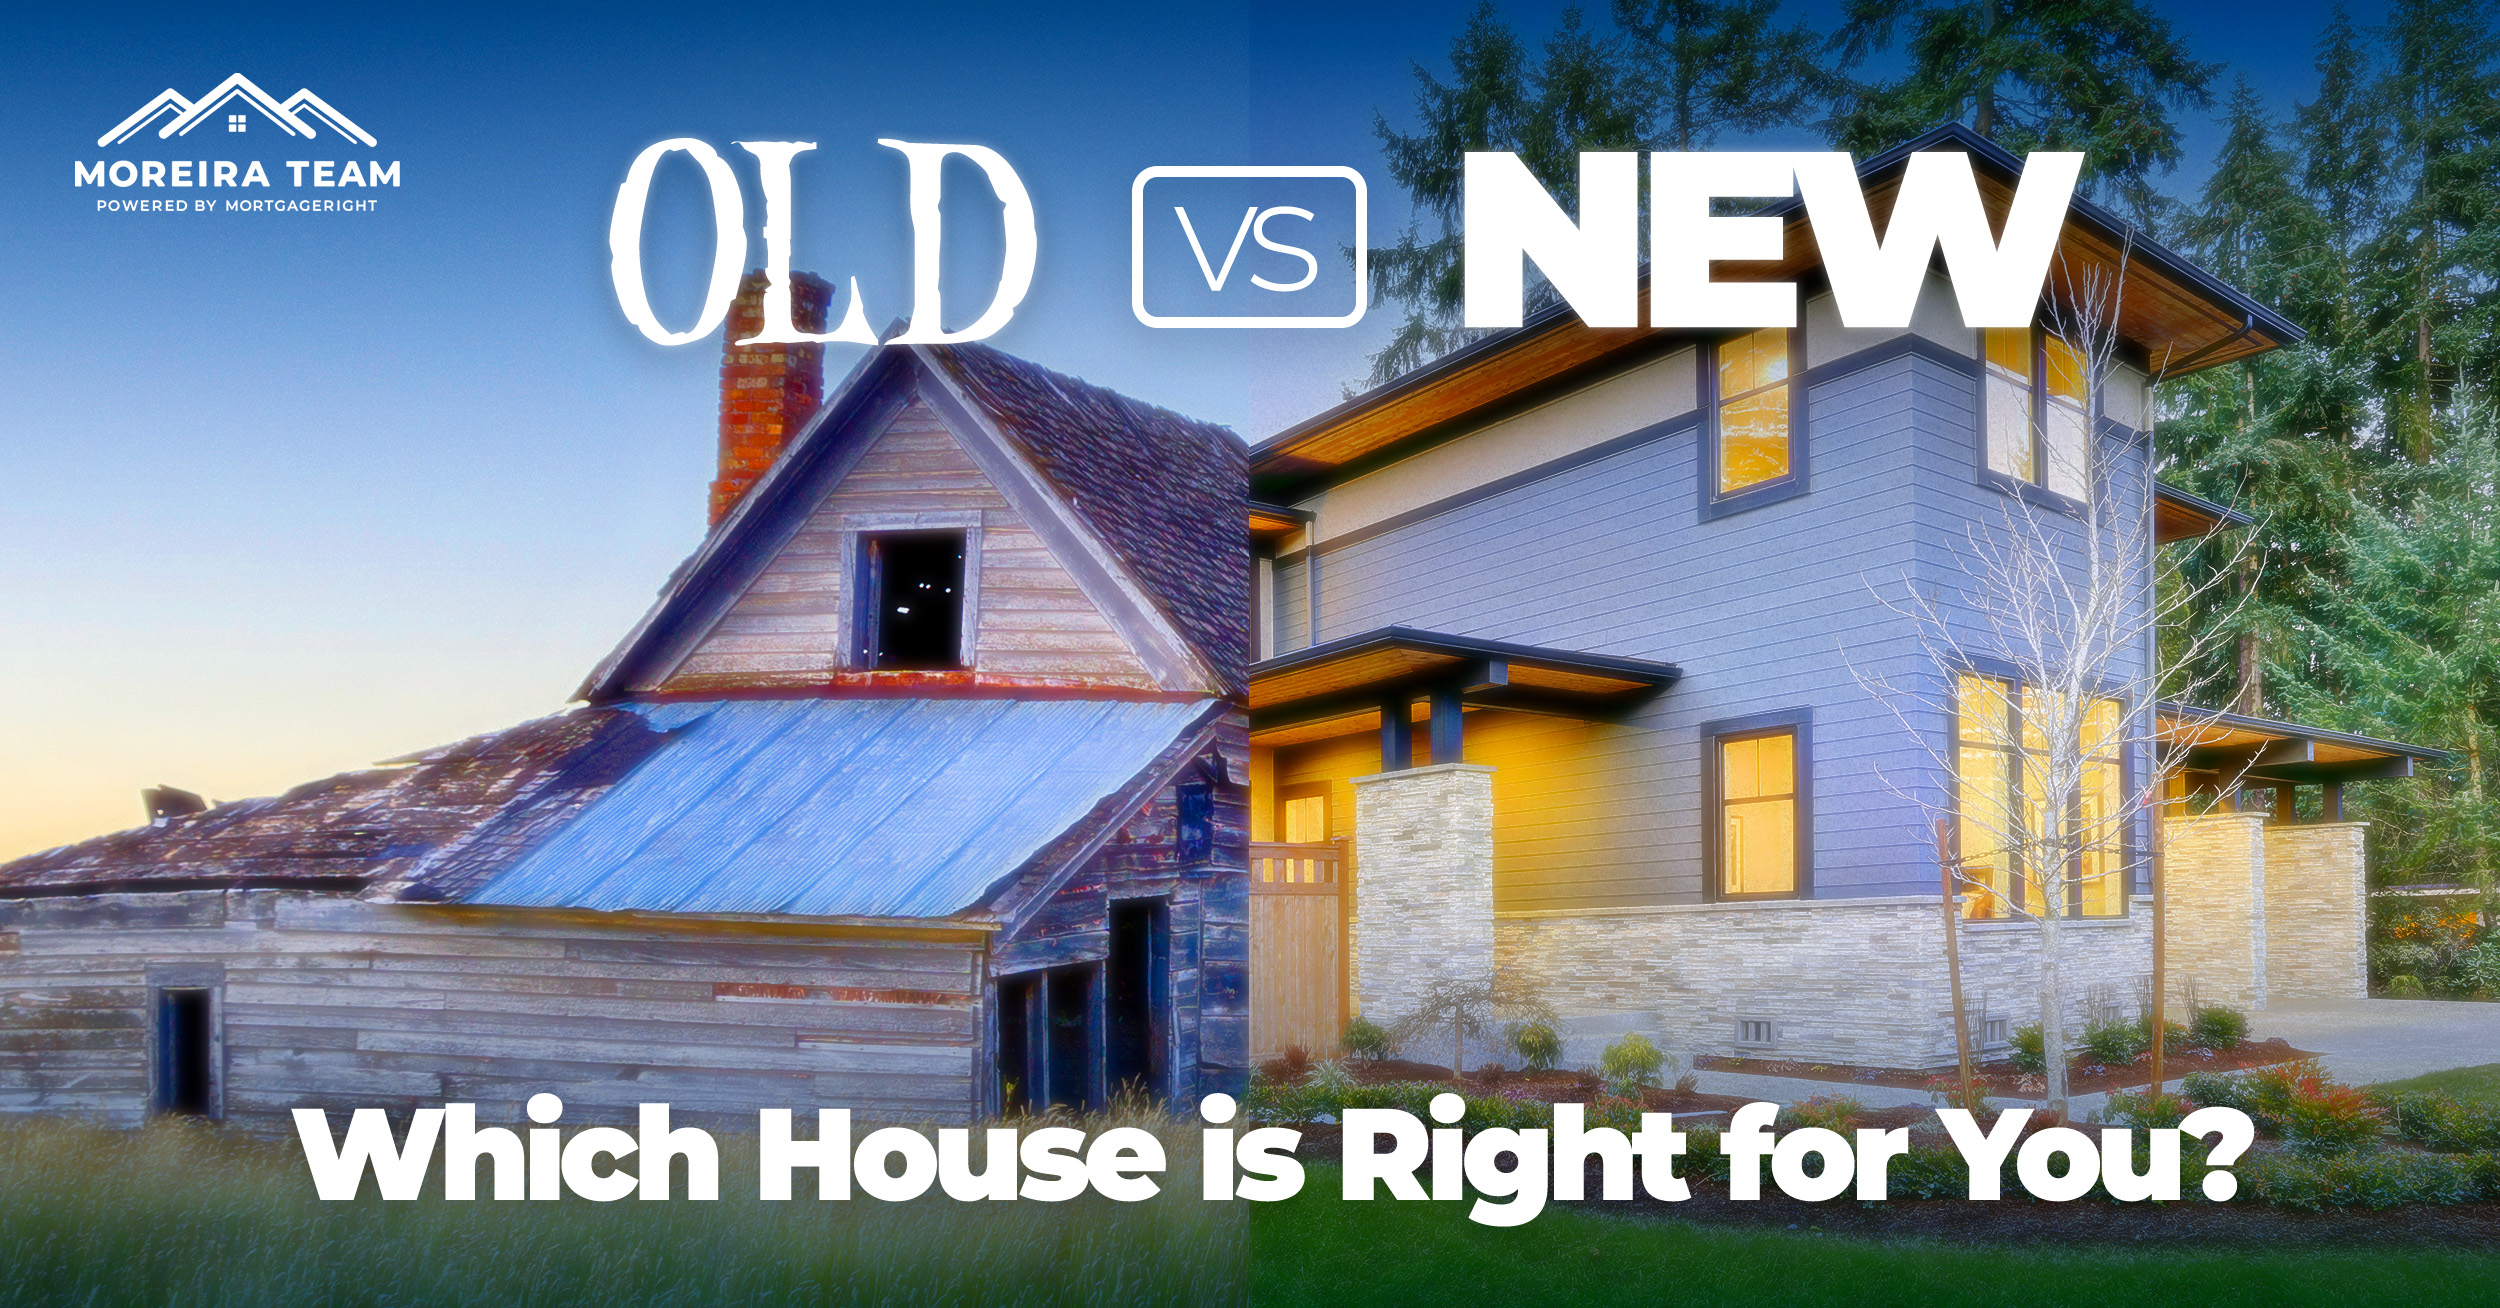 Old House vs New House: Which is Right for You?